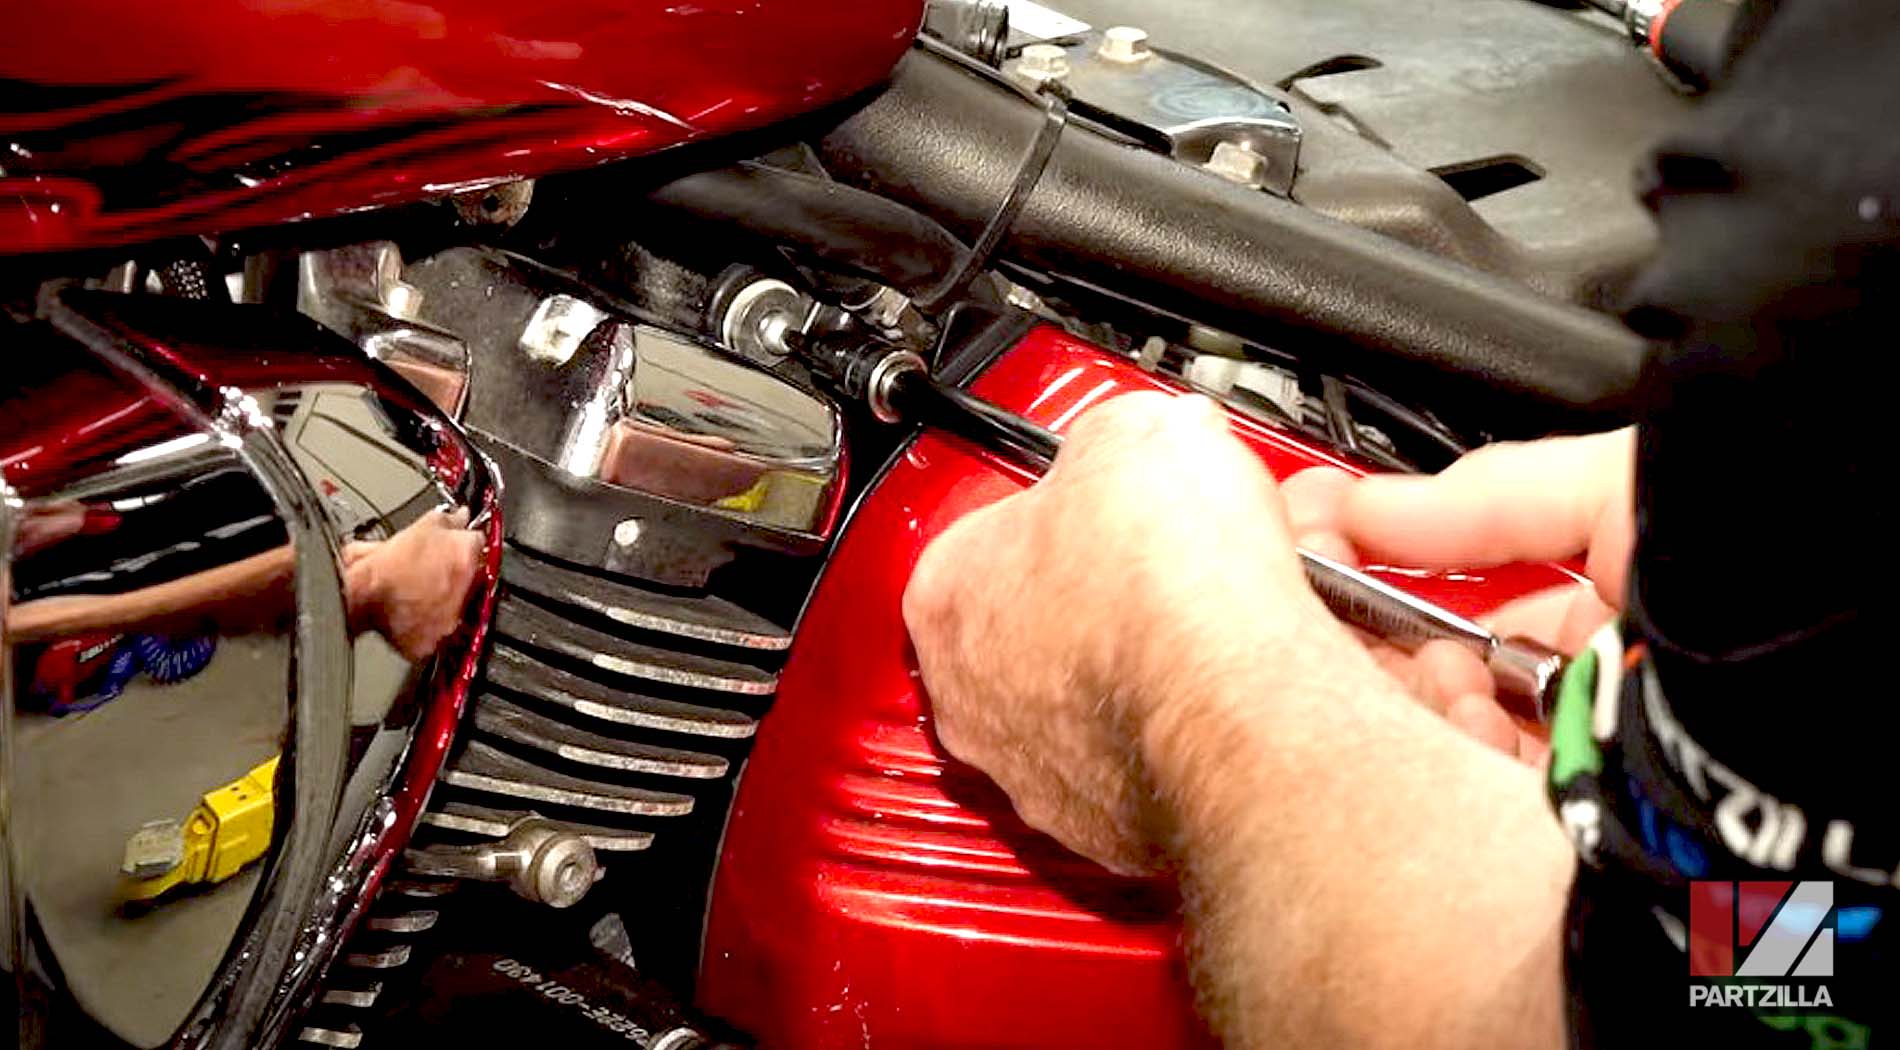 How to replace Yamaha motorcycle spark plugs